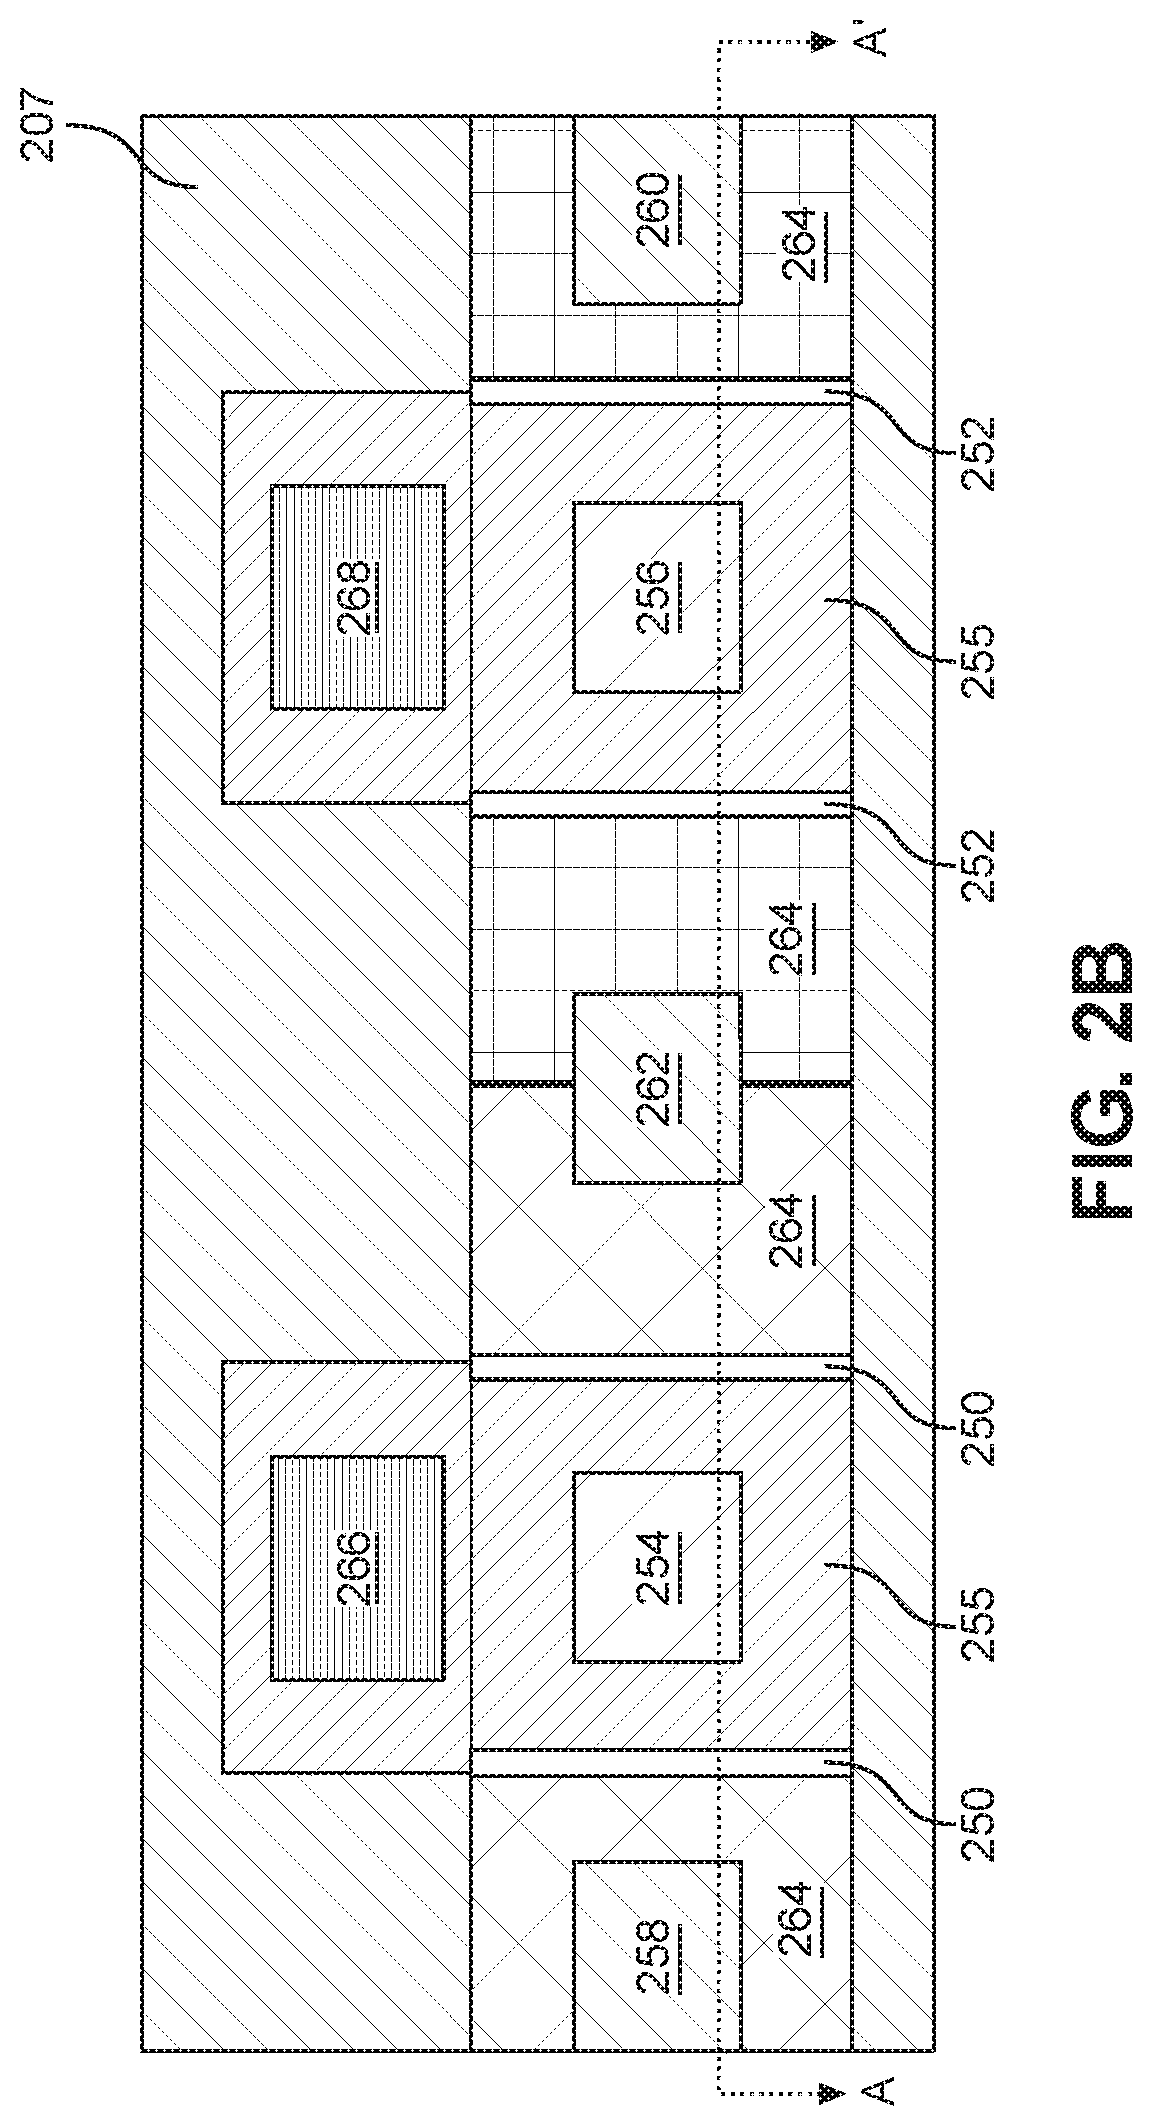 Double gate, flexible thin-film transistor (TFT) complementary metal-oxide semiconductor (MOS) (CMOS) circuits and related fabrication methods